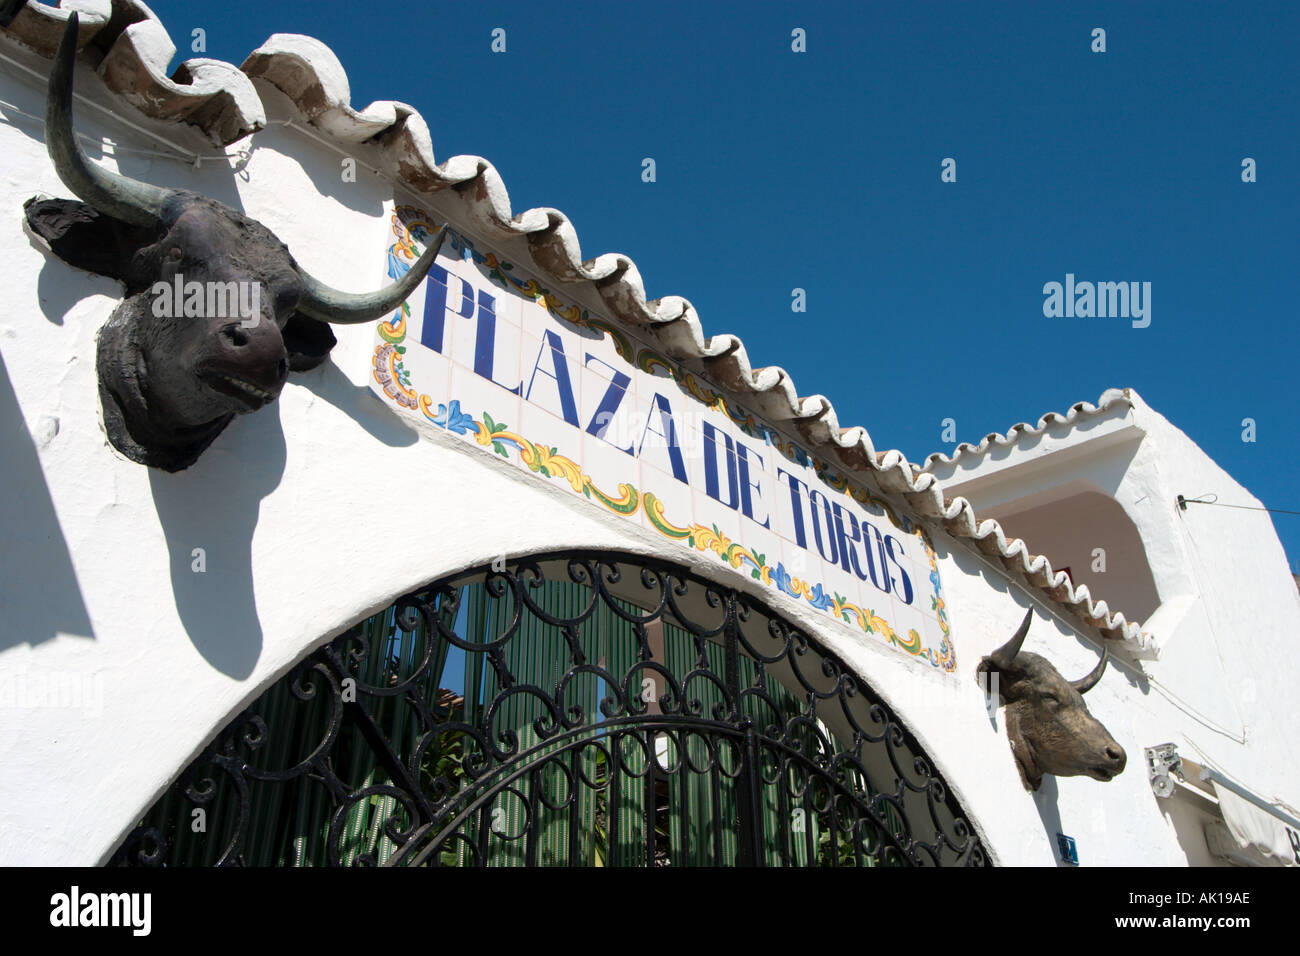 Entrance to the Plaza de Toros (Bullring) in the old town centre, Mijas, Costa del Sol, Andalusia, Spain Stock Photo